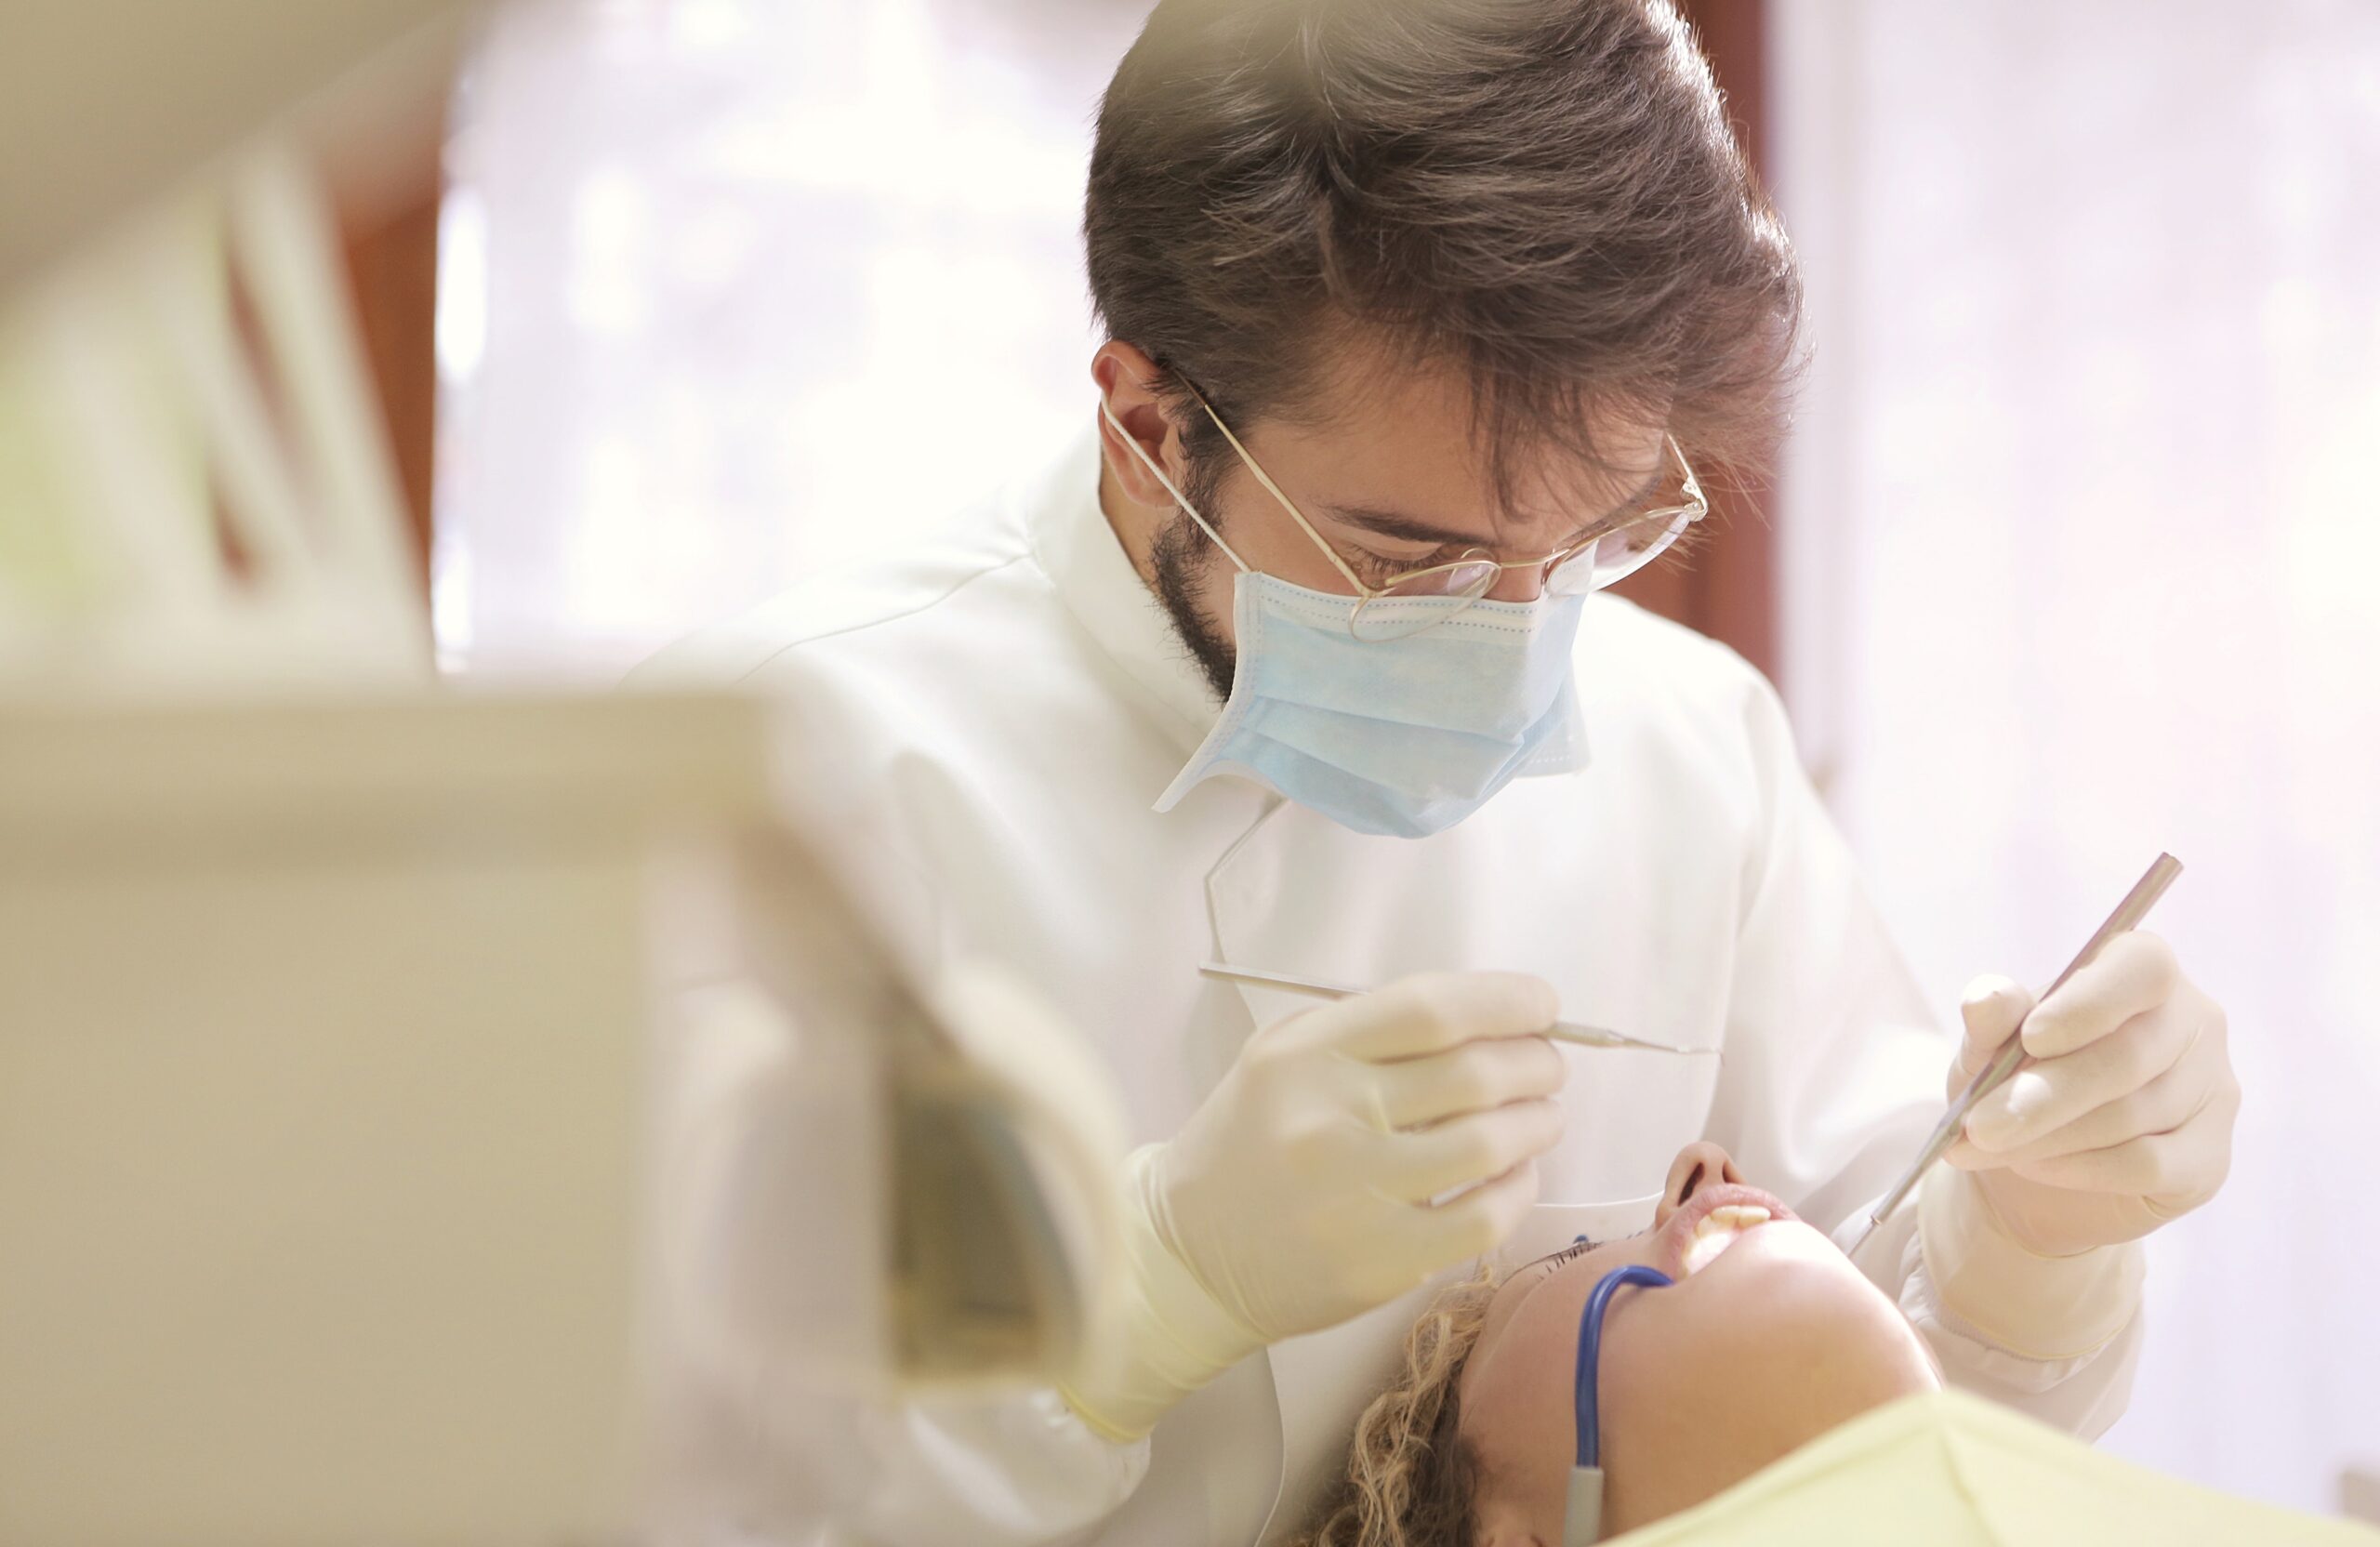 10 Things To Consider When Choosing An Orthodontist